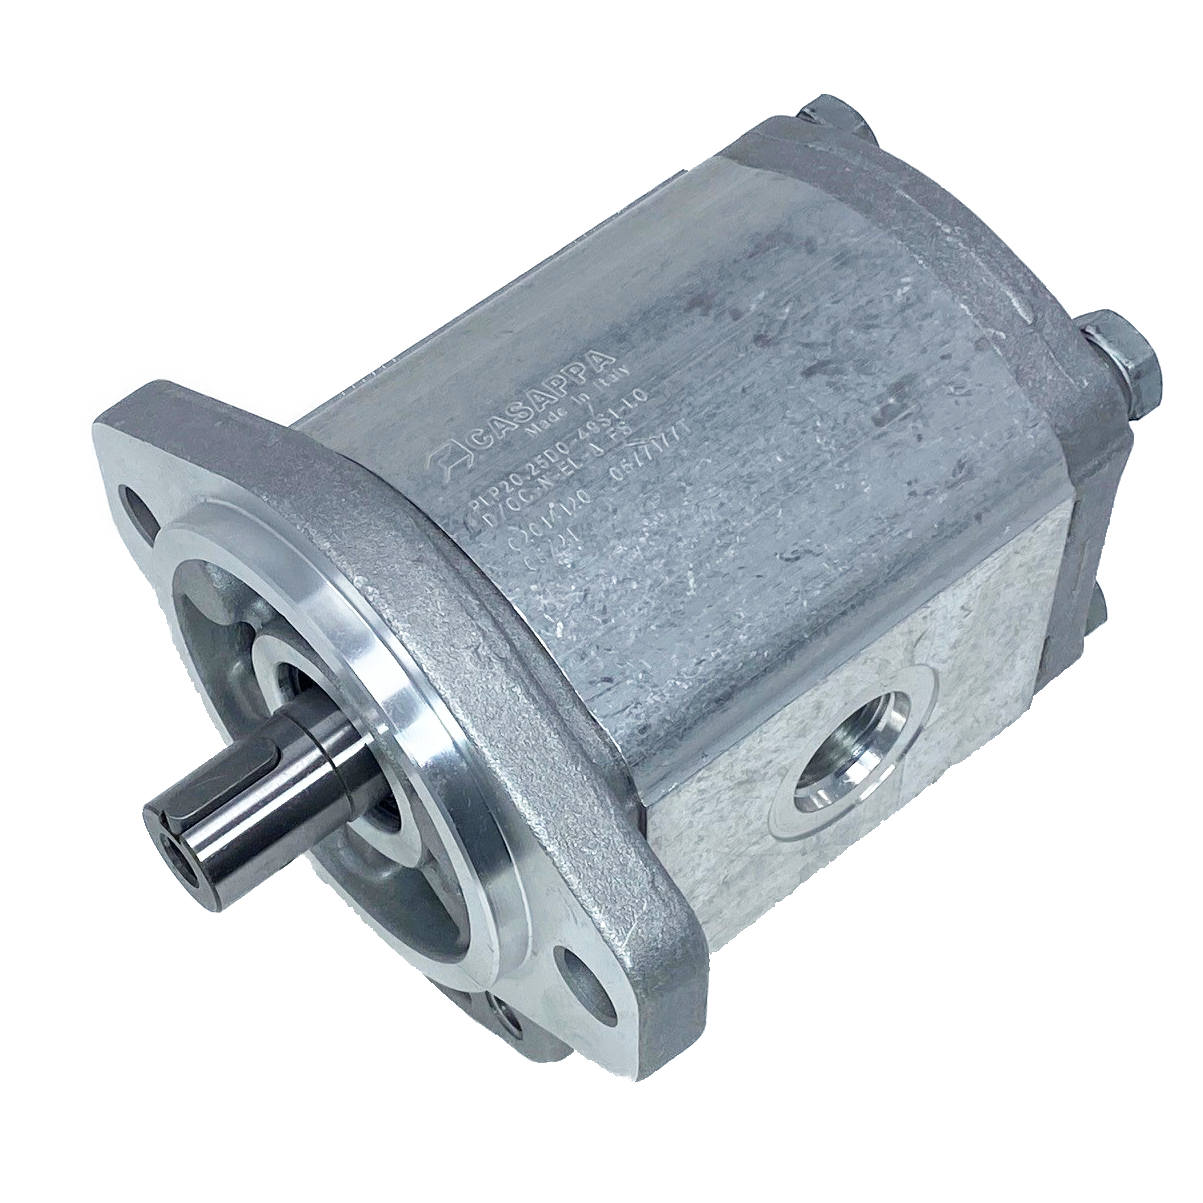 PHP20.27,8S0-50S9-LOG/OC-N-EL : Casappa Polaris Gear Pump, 28.21cc, 2900psi Rated, 2500RPM, CCW, 3/4" Bore x 3/16" Key Shaft, SAE A 2-Bolt Flange, 1.25" #20 SAE Inlet, 0.625 (5/8") #10 SAE Outlet, Cast Iron Body, Aluminum Flange